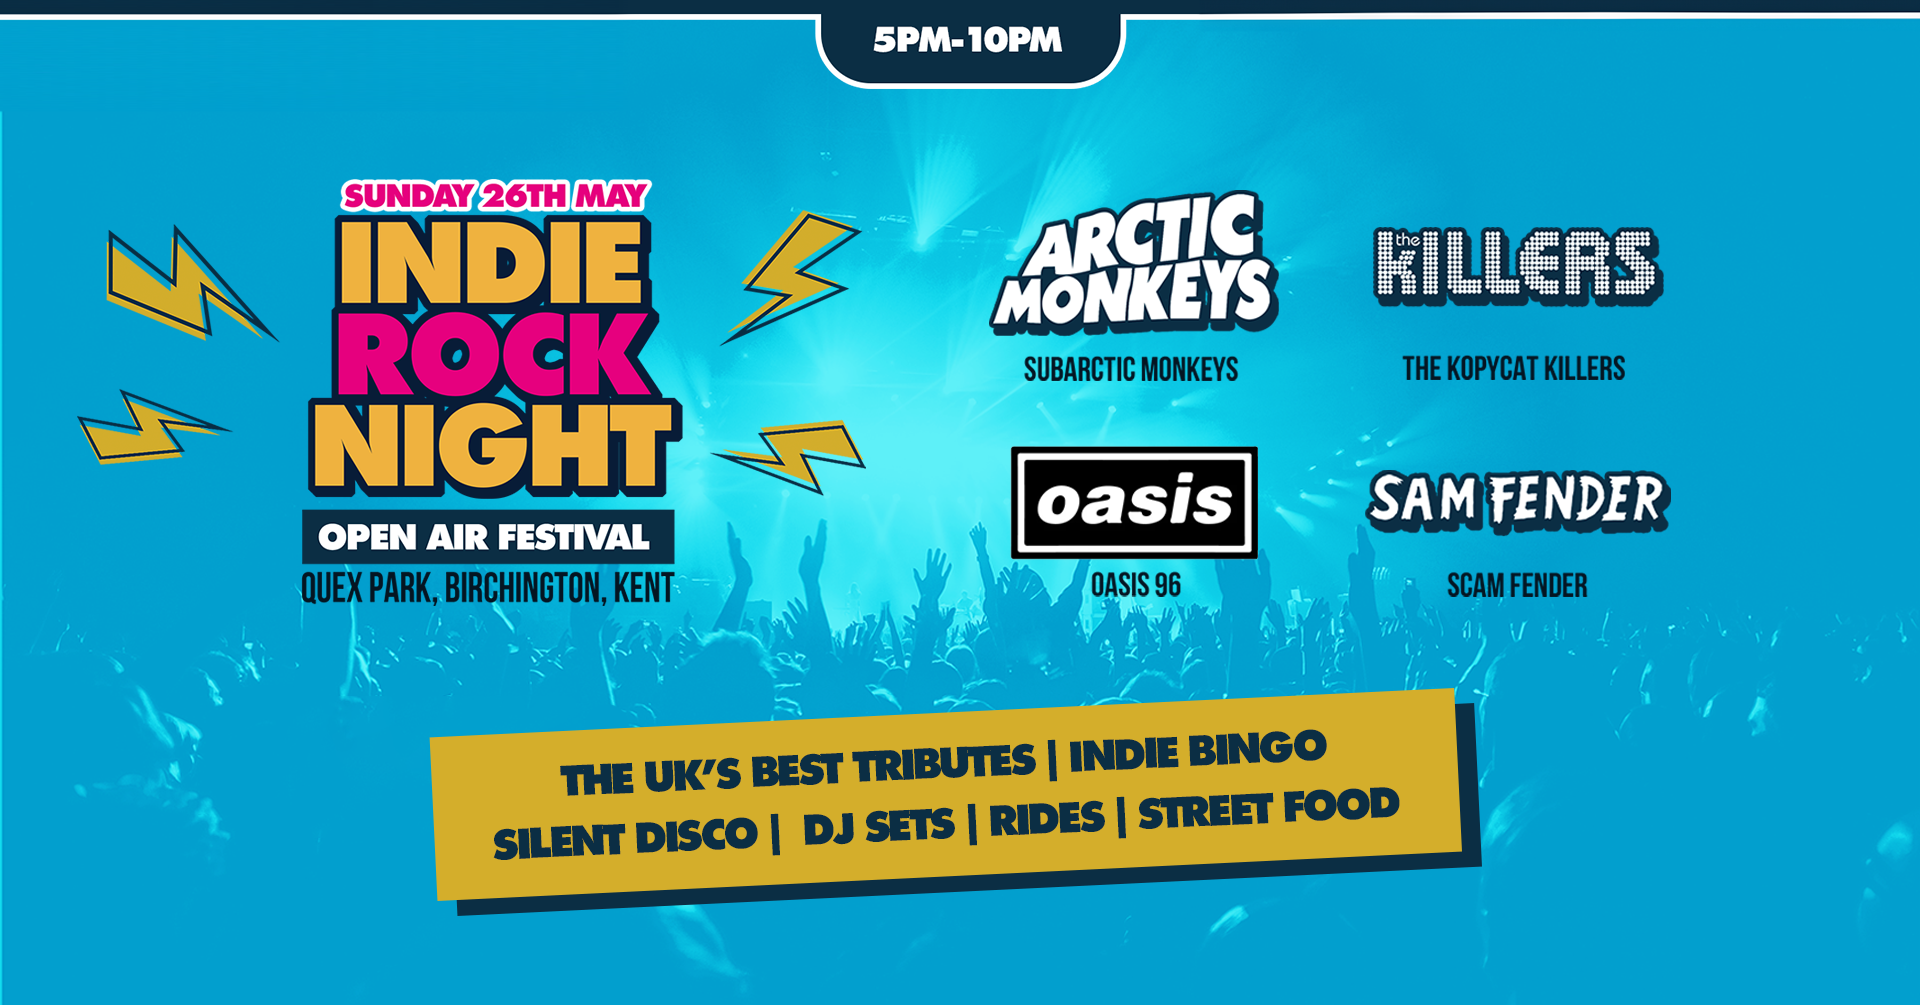 INDIE ROCK NIGHT ∙ Open Air Festival *50 £15 TICKETS JUST ADDED*